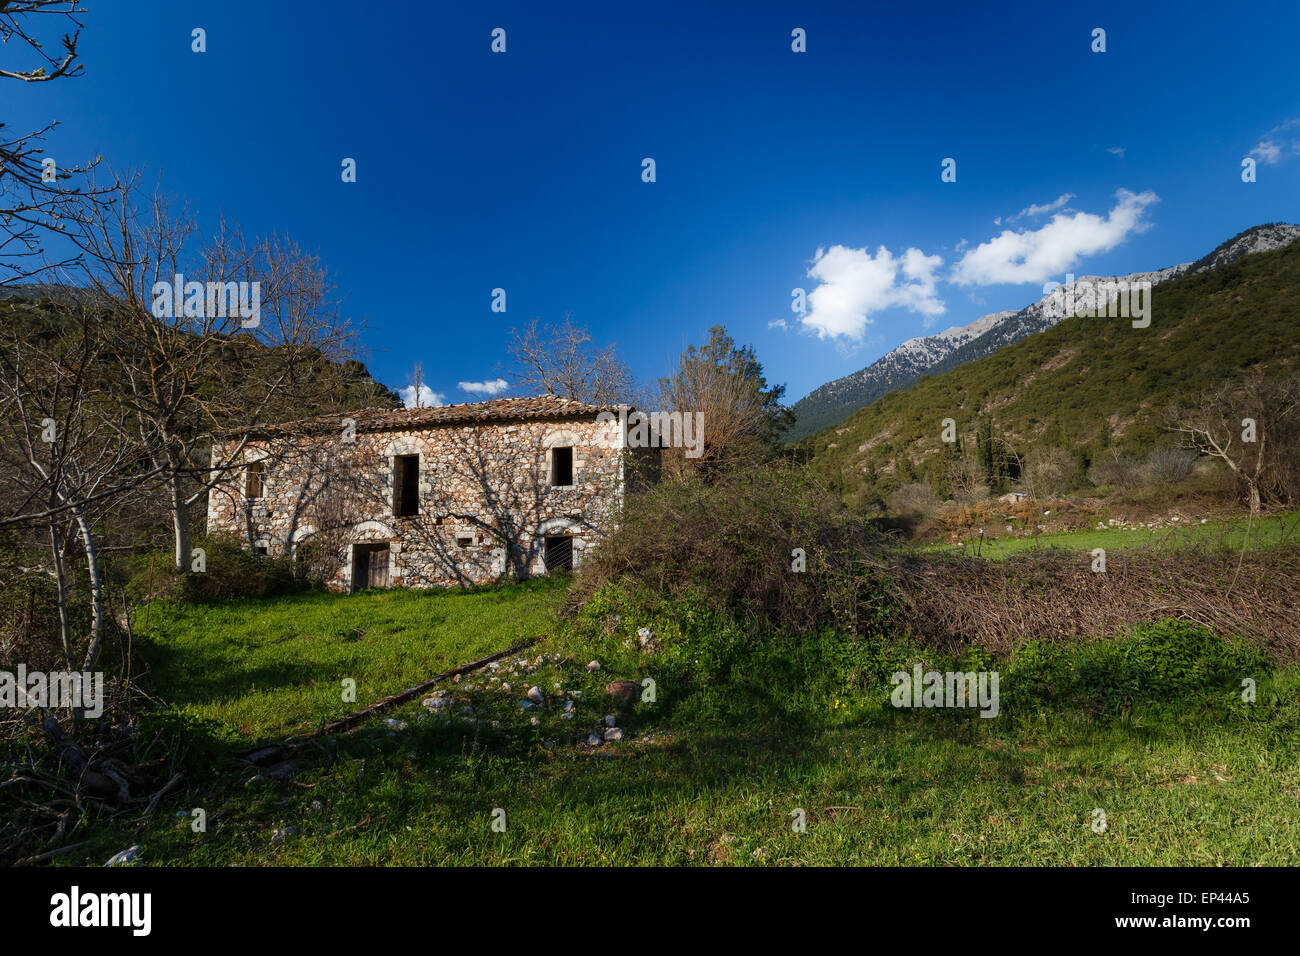 Old abandoned stone house ruins in countryside in Greece against a blue sky Stock Photo